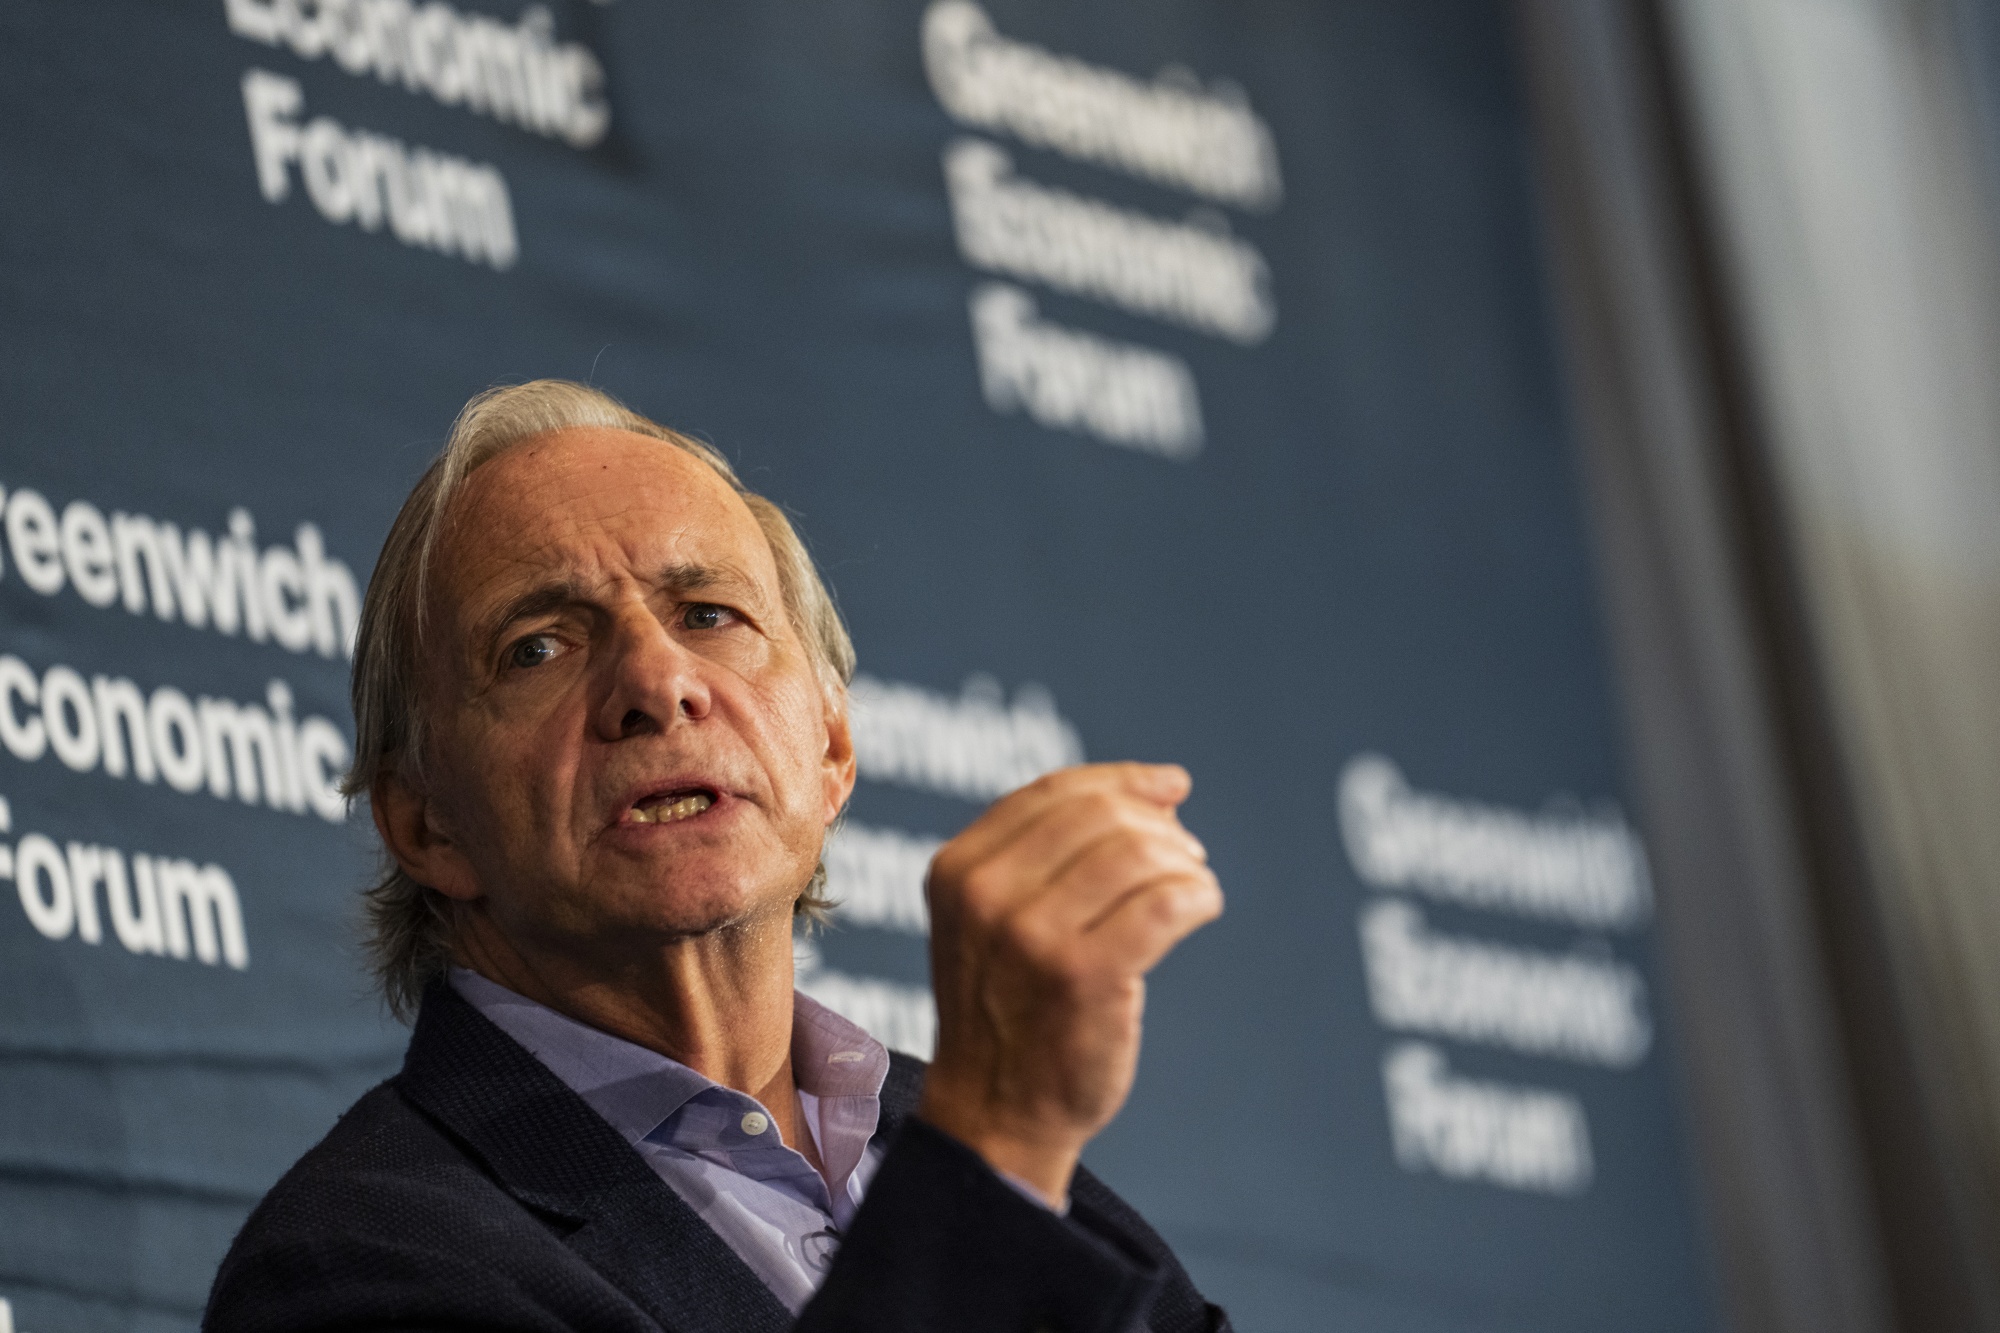 Bridgewater's Ray Dalio advises being underweight cash due to inflation  environment